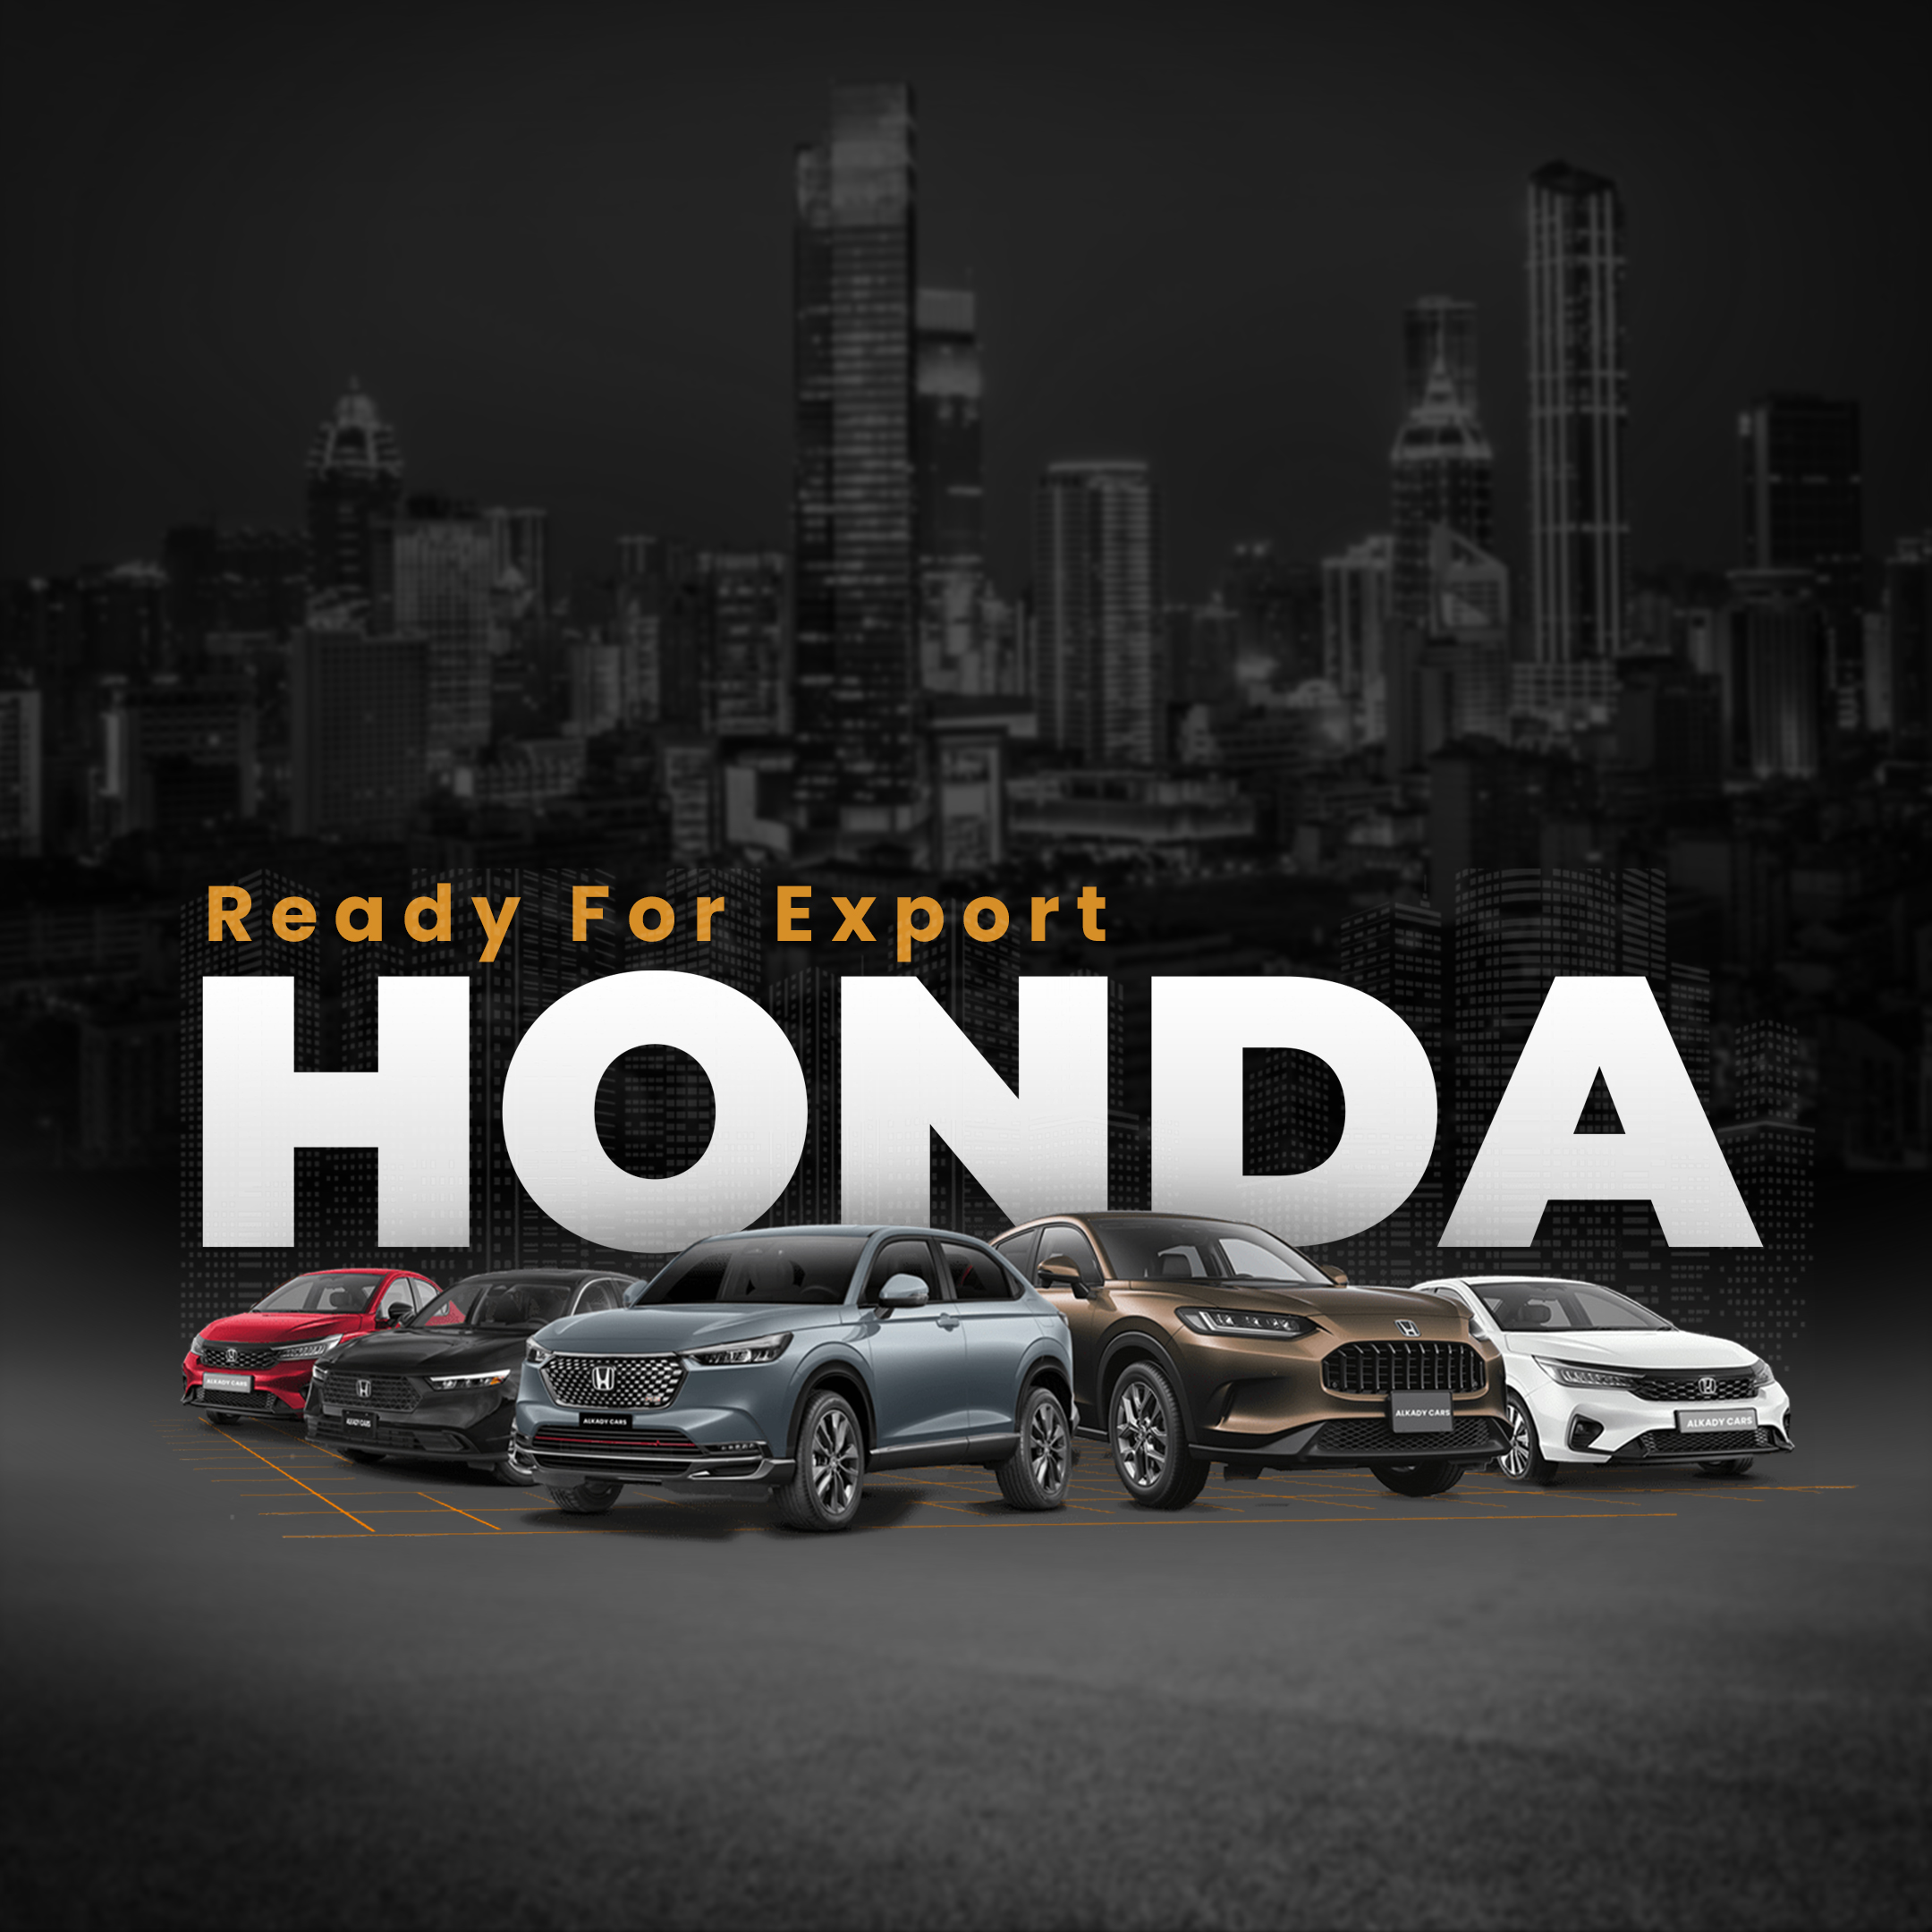 Explore the Exciting Collection of Honda Cars Ready for Export by Alkady Cars